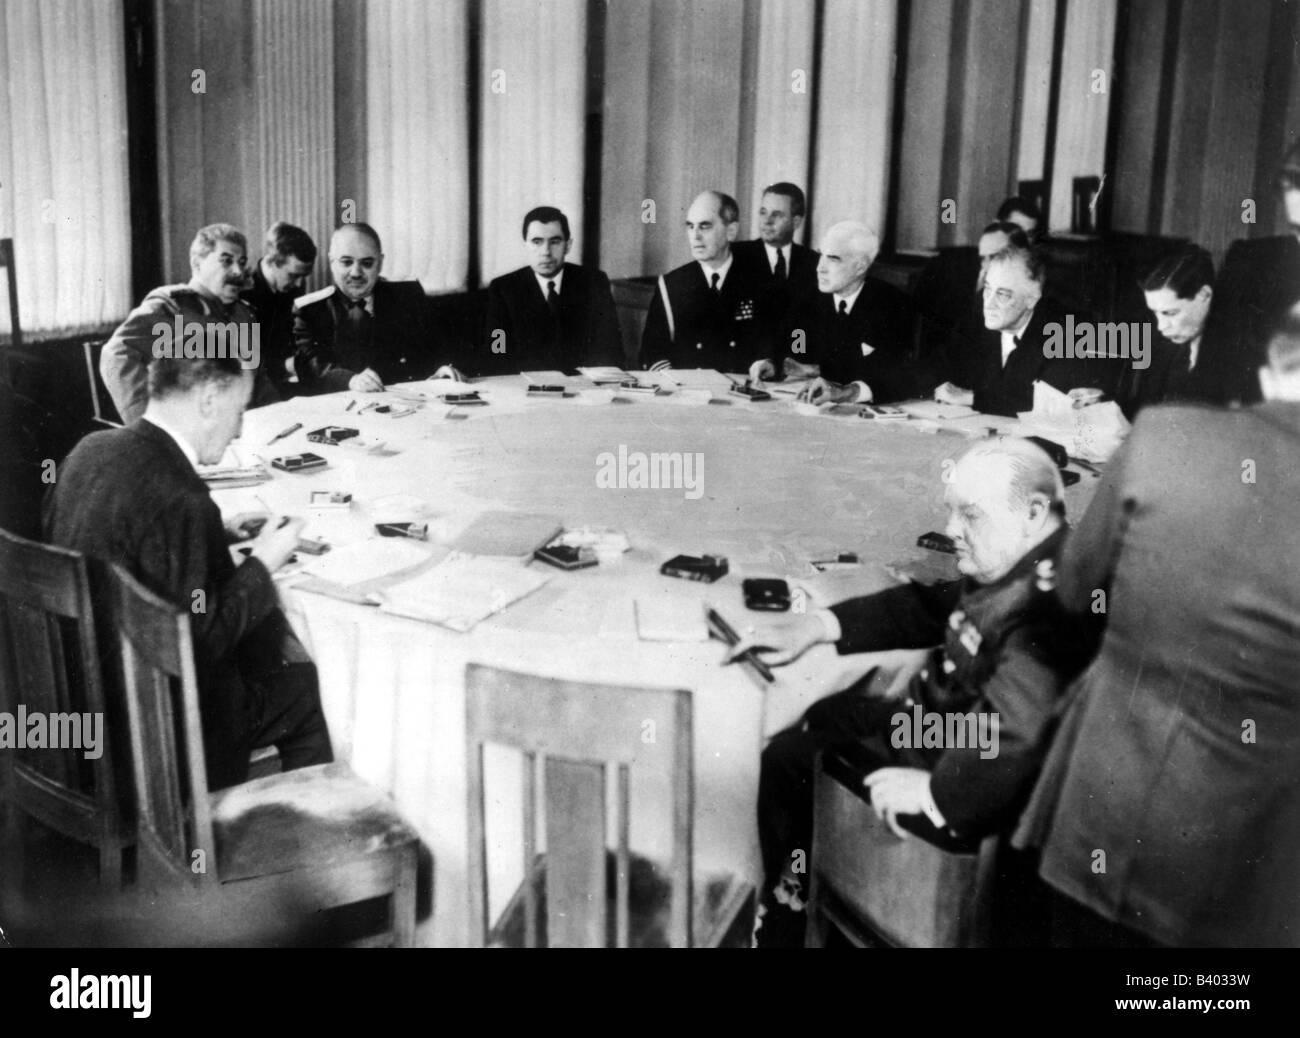 events, Second World War / WWII, conferences, Yalta Conference, 4.2.1945 - 11.2.1945, Joseph Stalin, Franklin D. Roosevelt and Winston Churchill with their delegations during the negotiations, Livadia Palace, Stock Photo